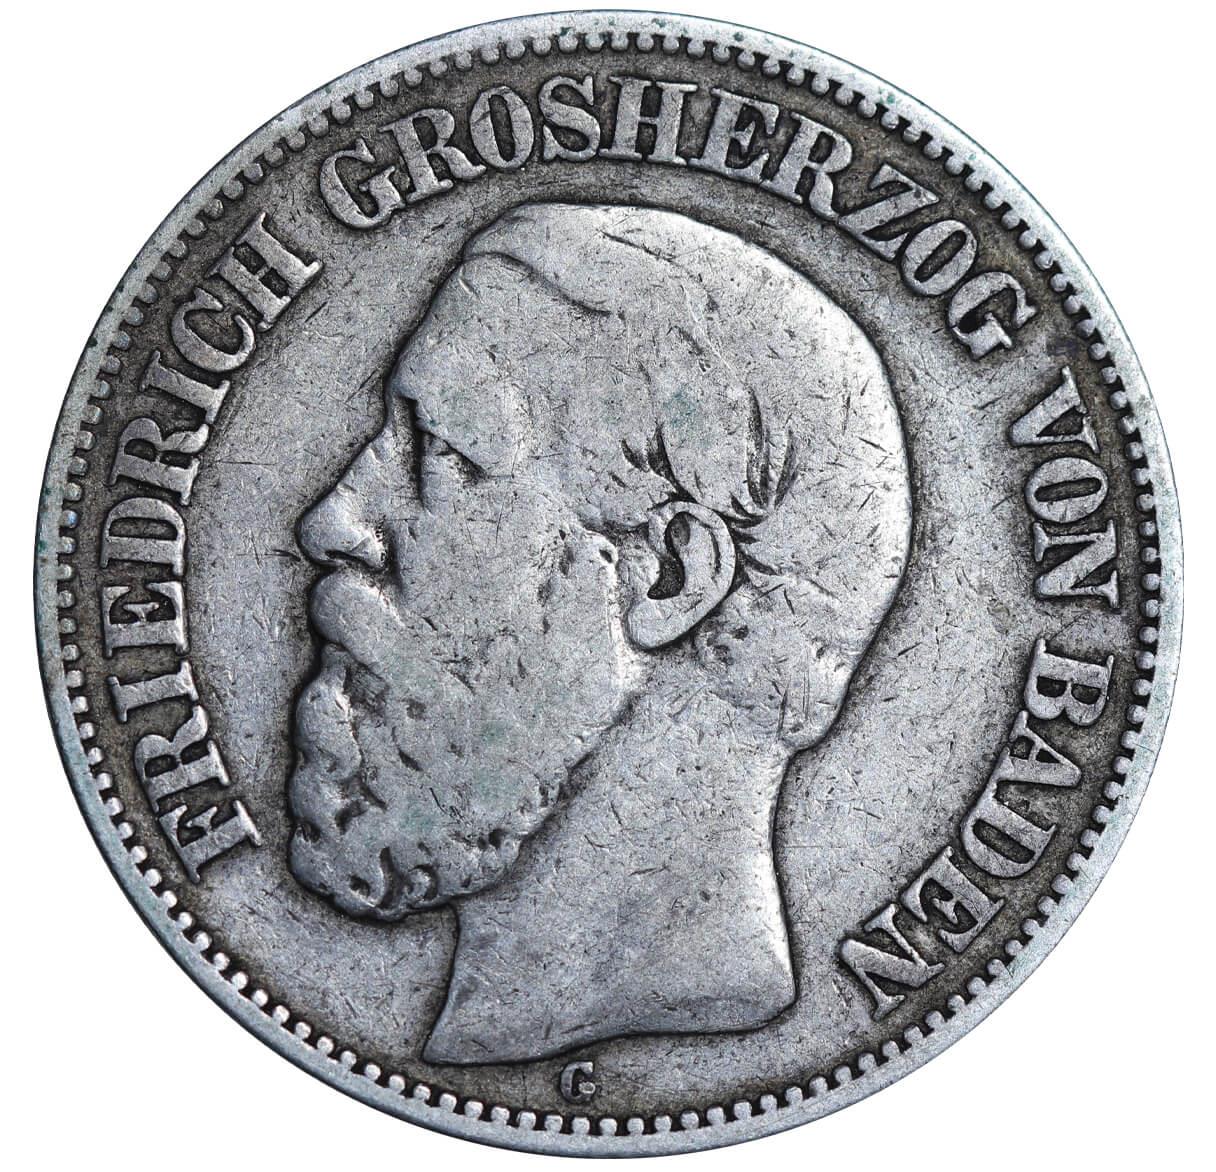 Grand Duchy of Baden, 2 Marks, 1877 year, G - Image 2 of 3